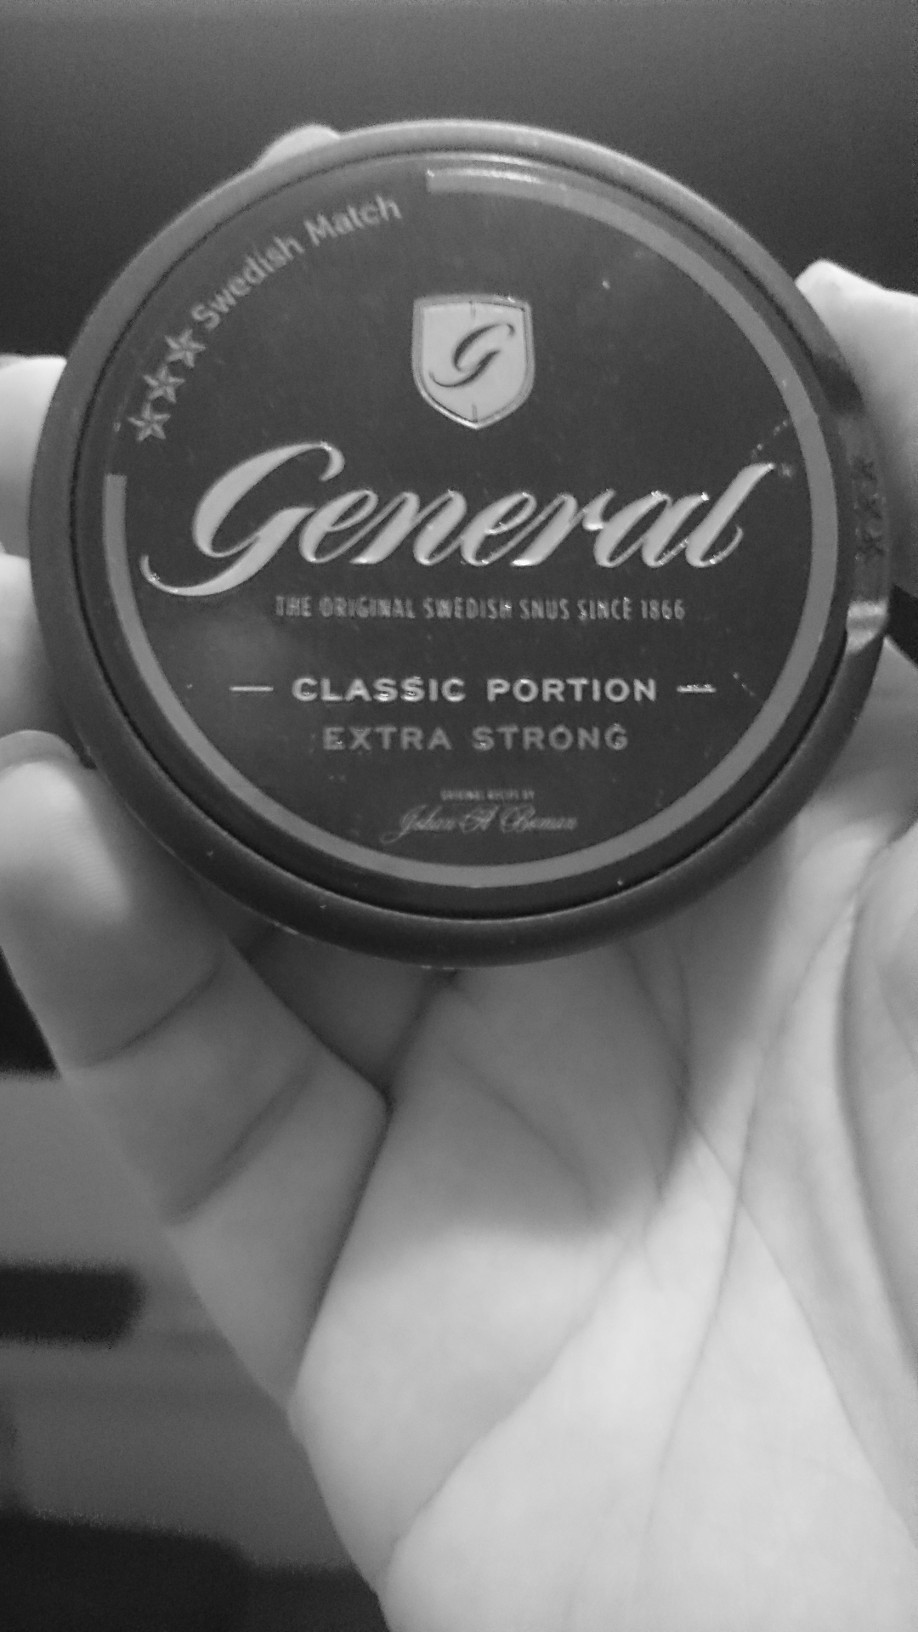 Holding a box of General snus